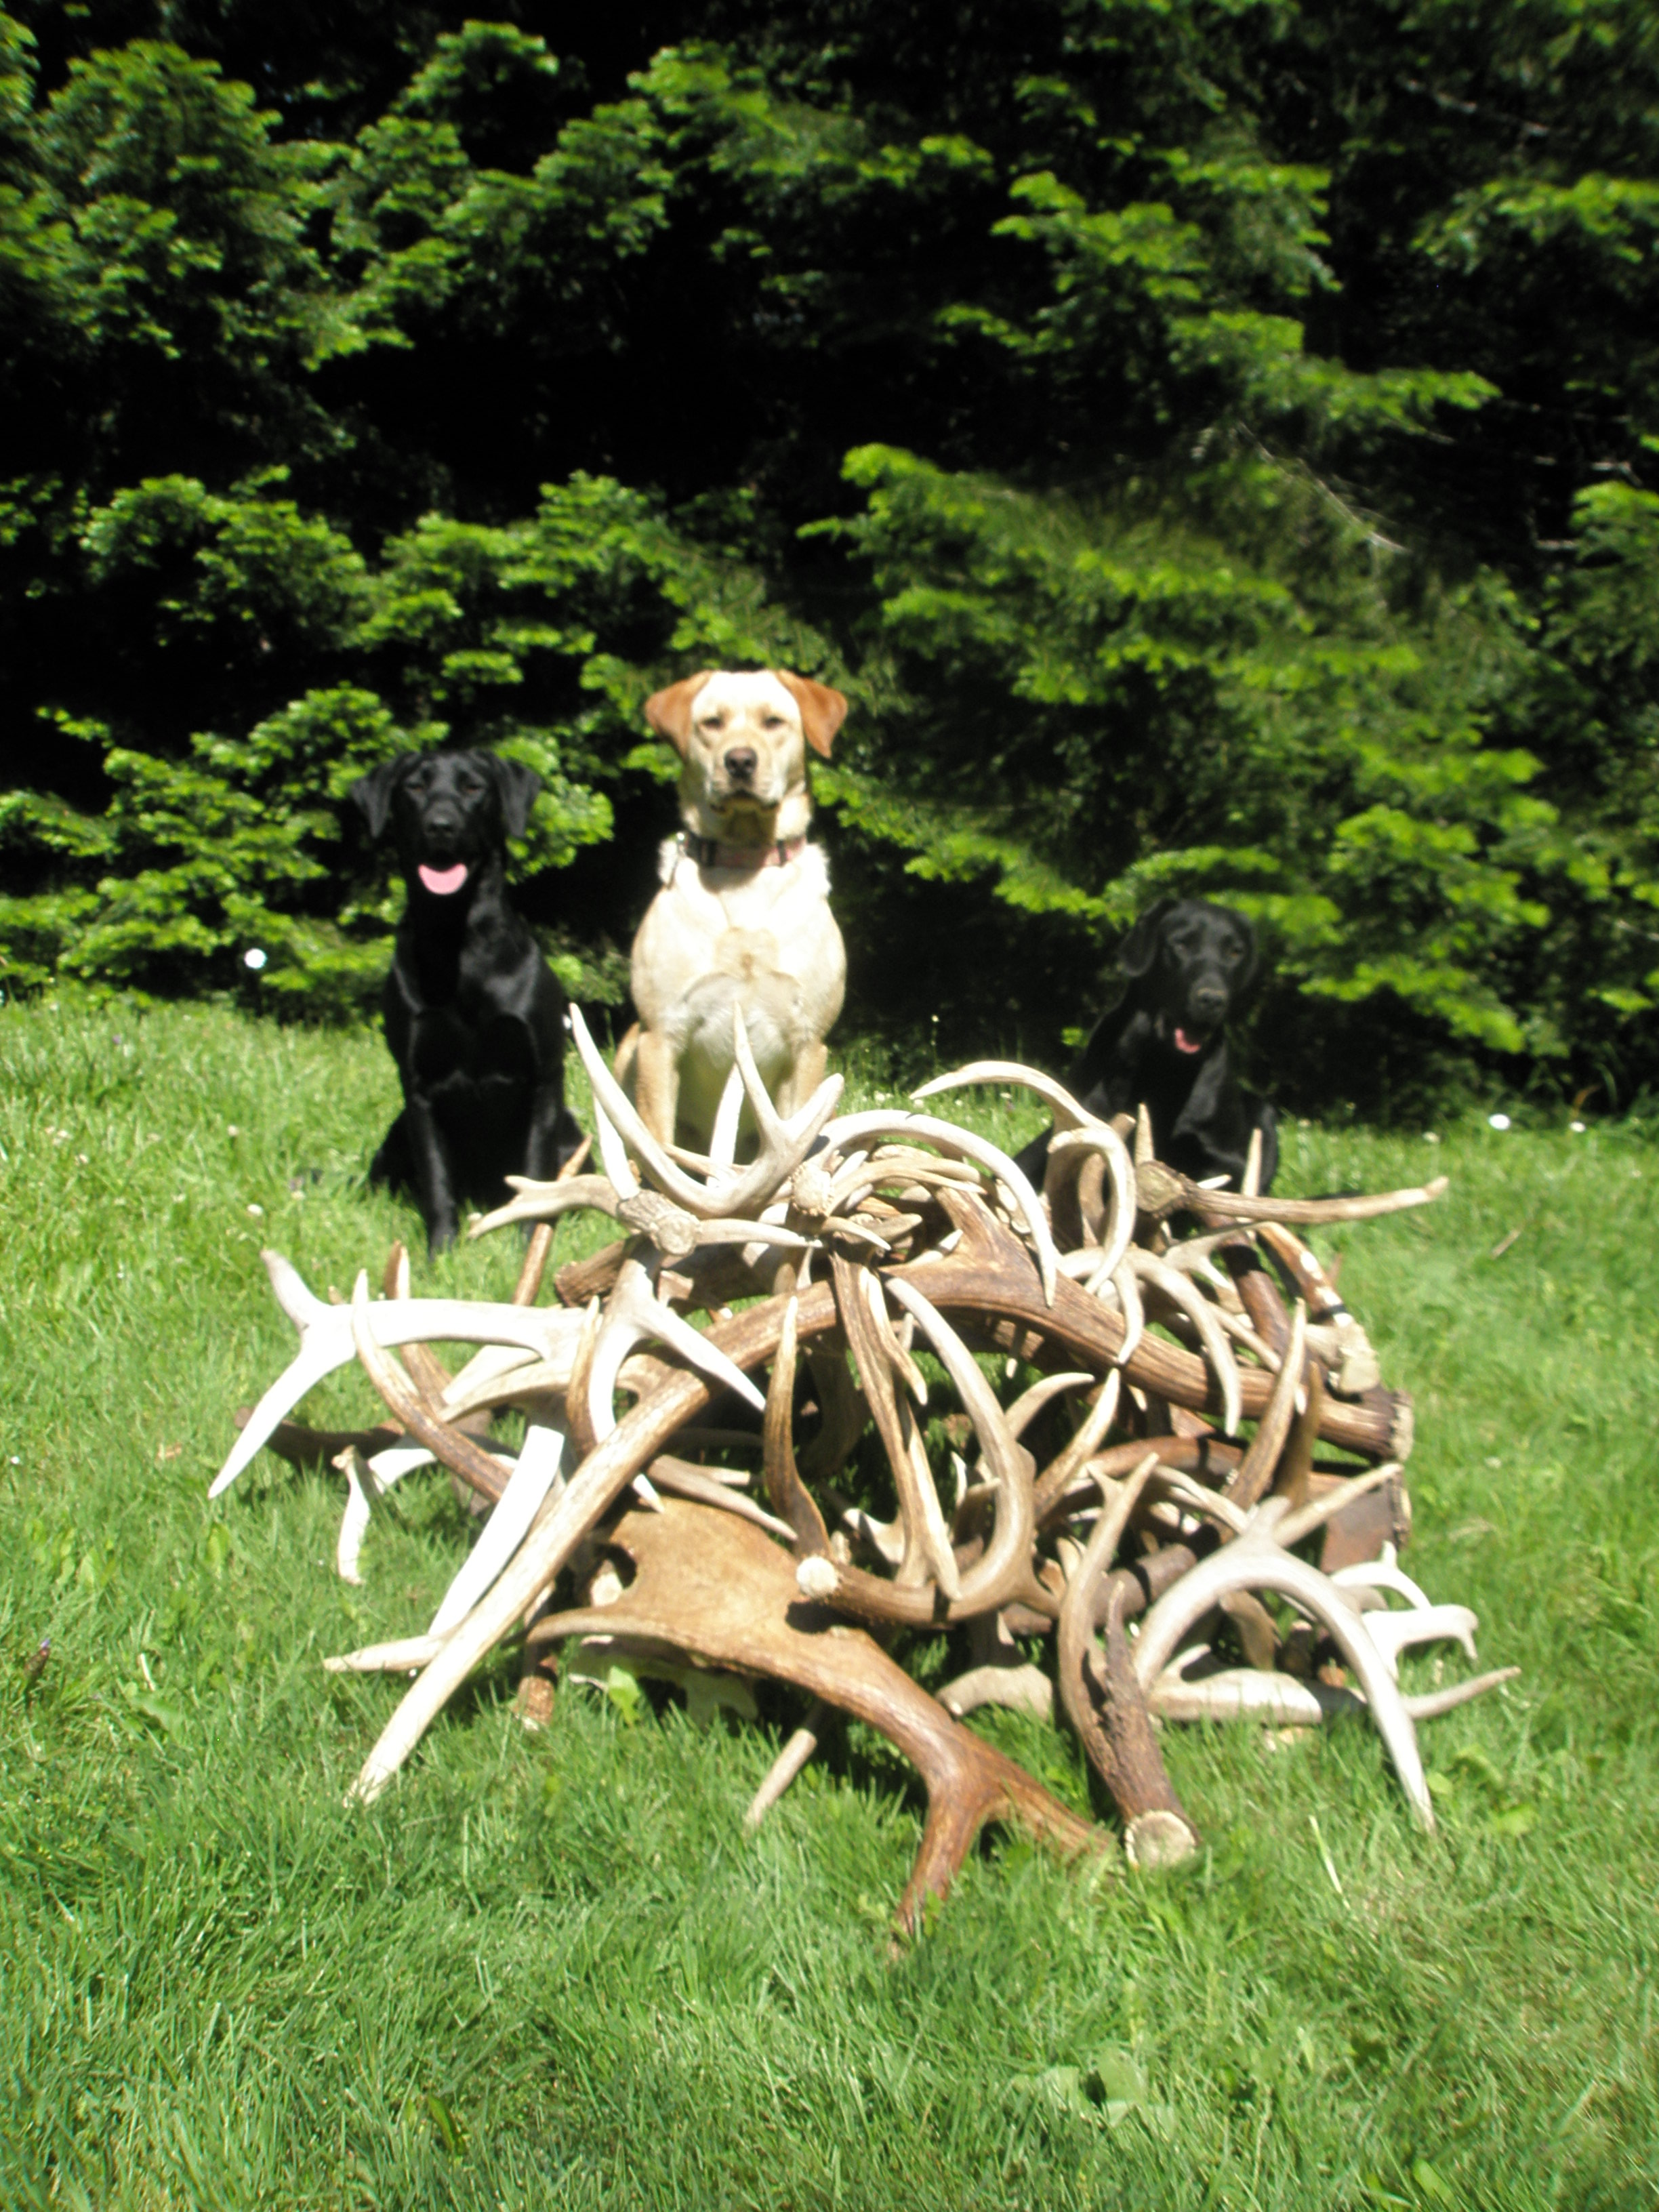 North Idaho Shed Antler Dogs | Trained 